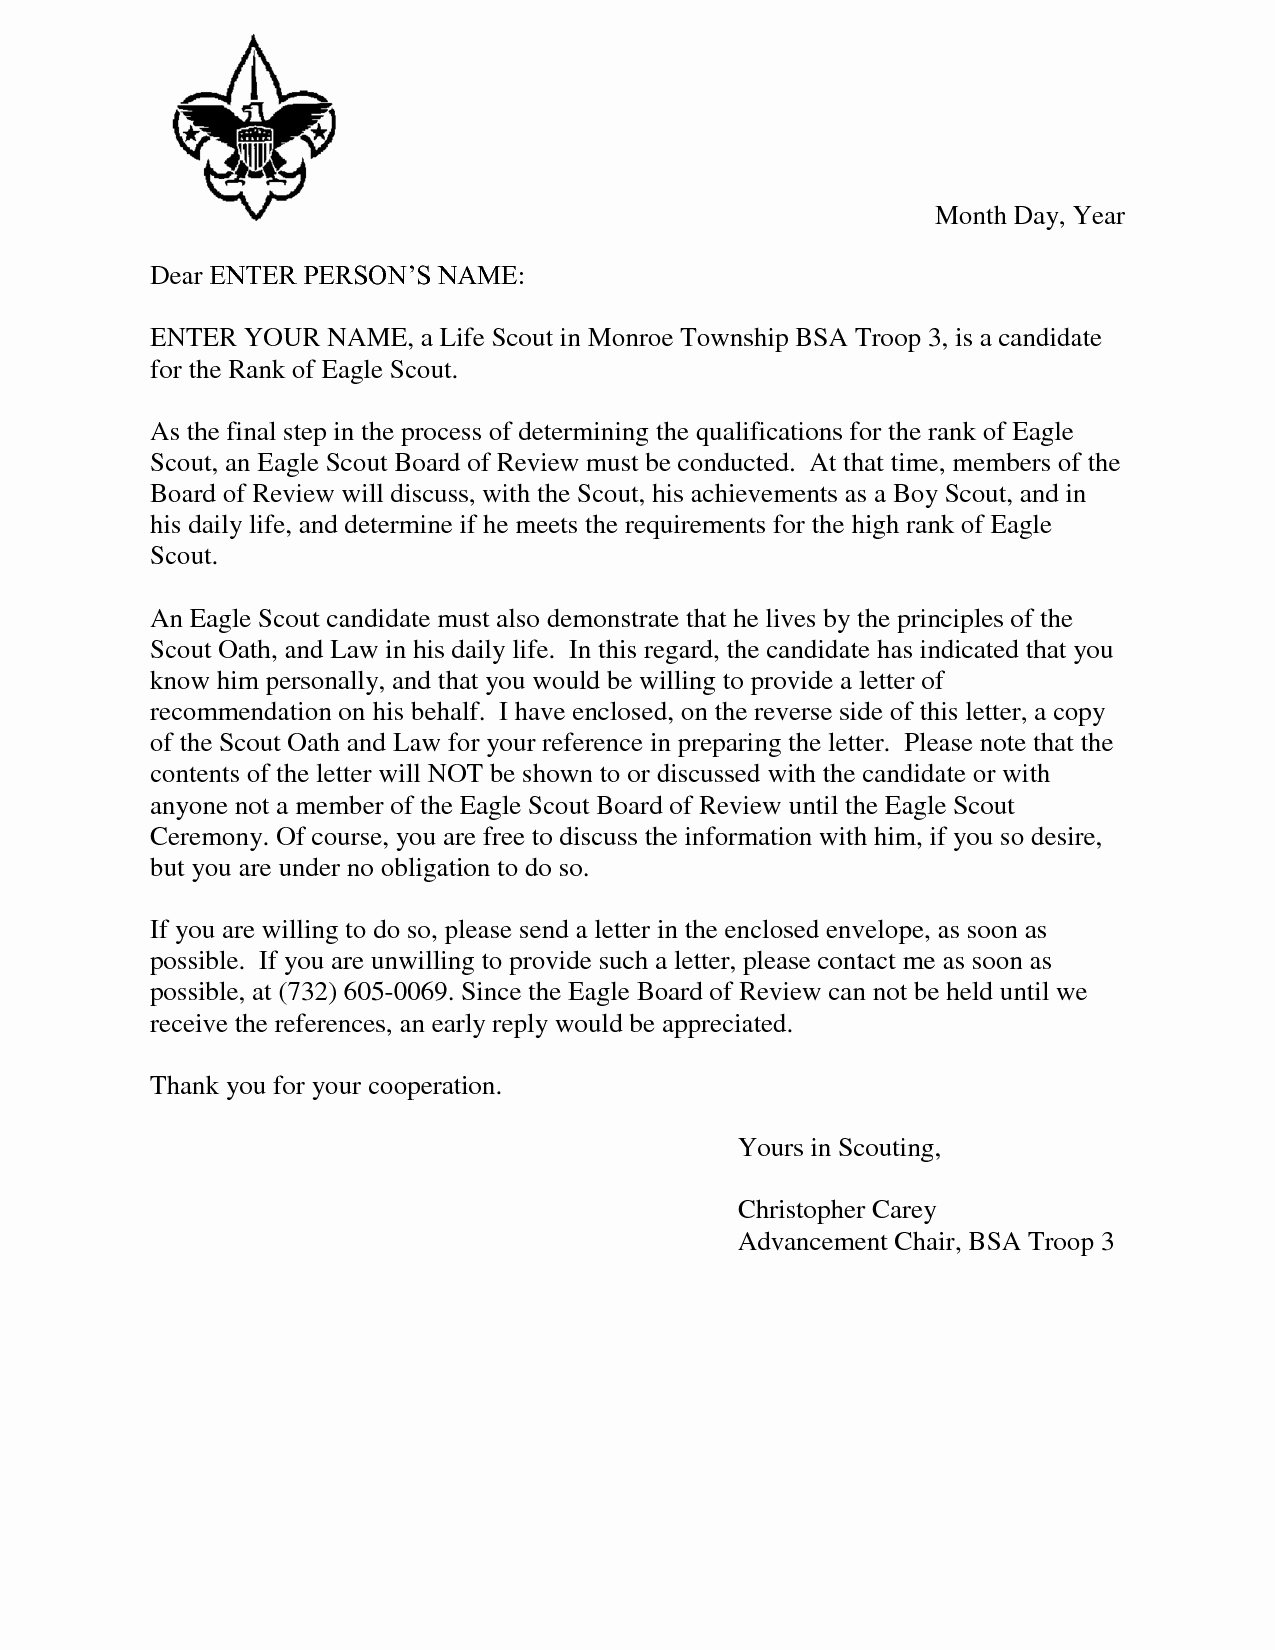 Religious Recommendation Letter Sample Beautiful Eagle Scout Reference Request Sample Letter Doc 7 by